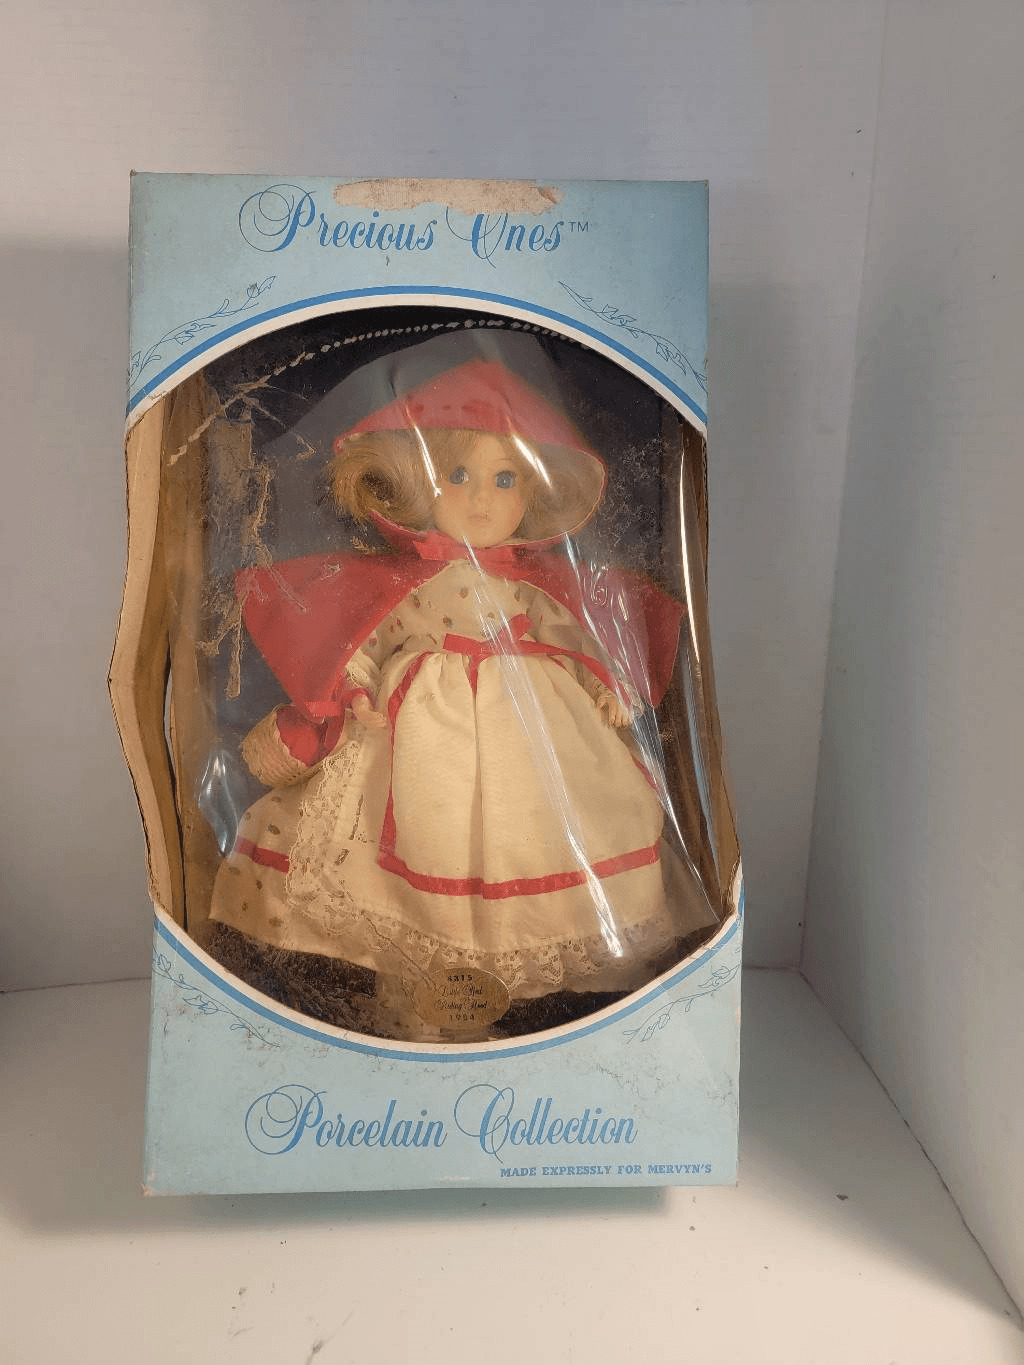 Vintage 1984 Precious Ones Porcelain Collection Little Red Riding Hood Doll IOB